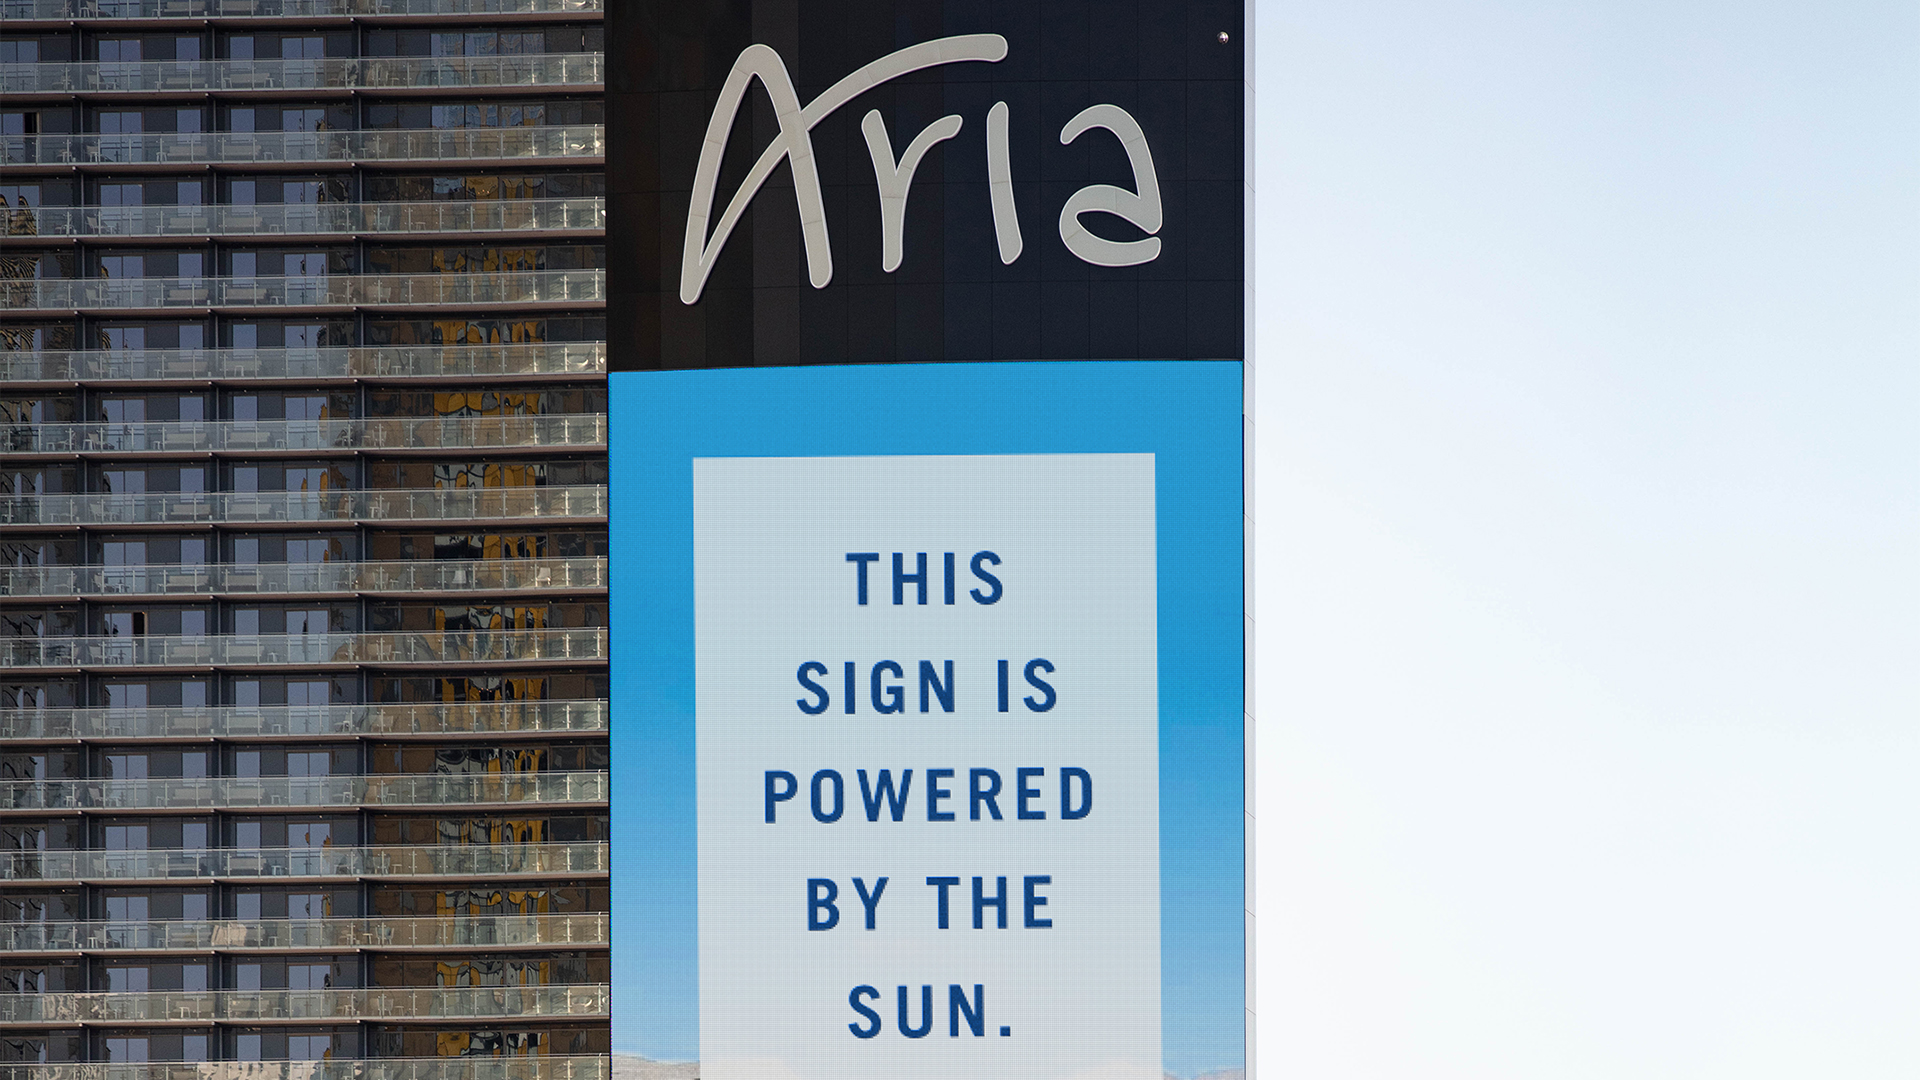 Aria Powered by the Sun sign